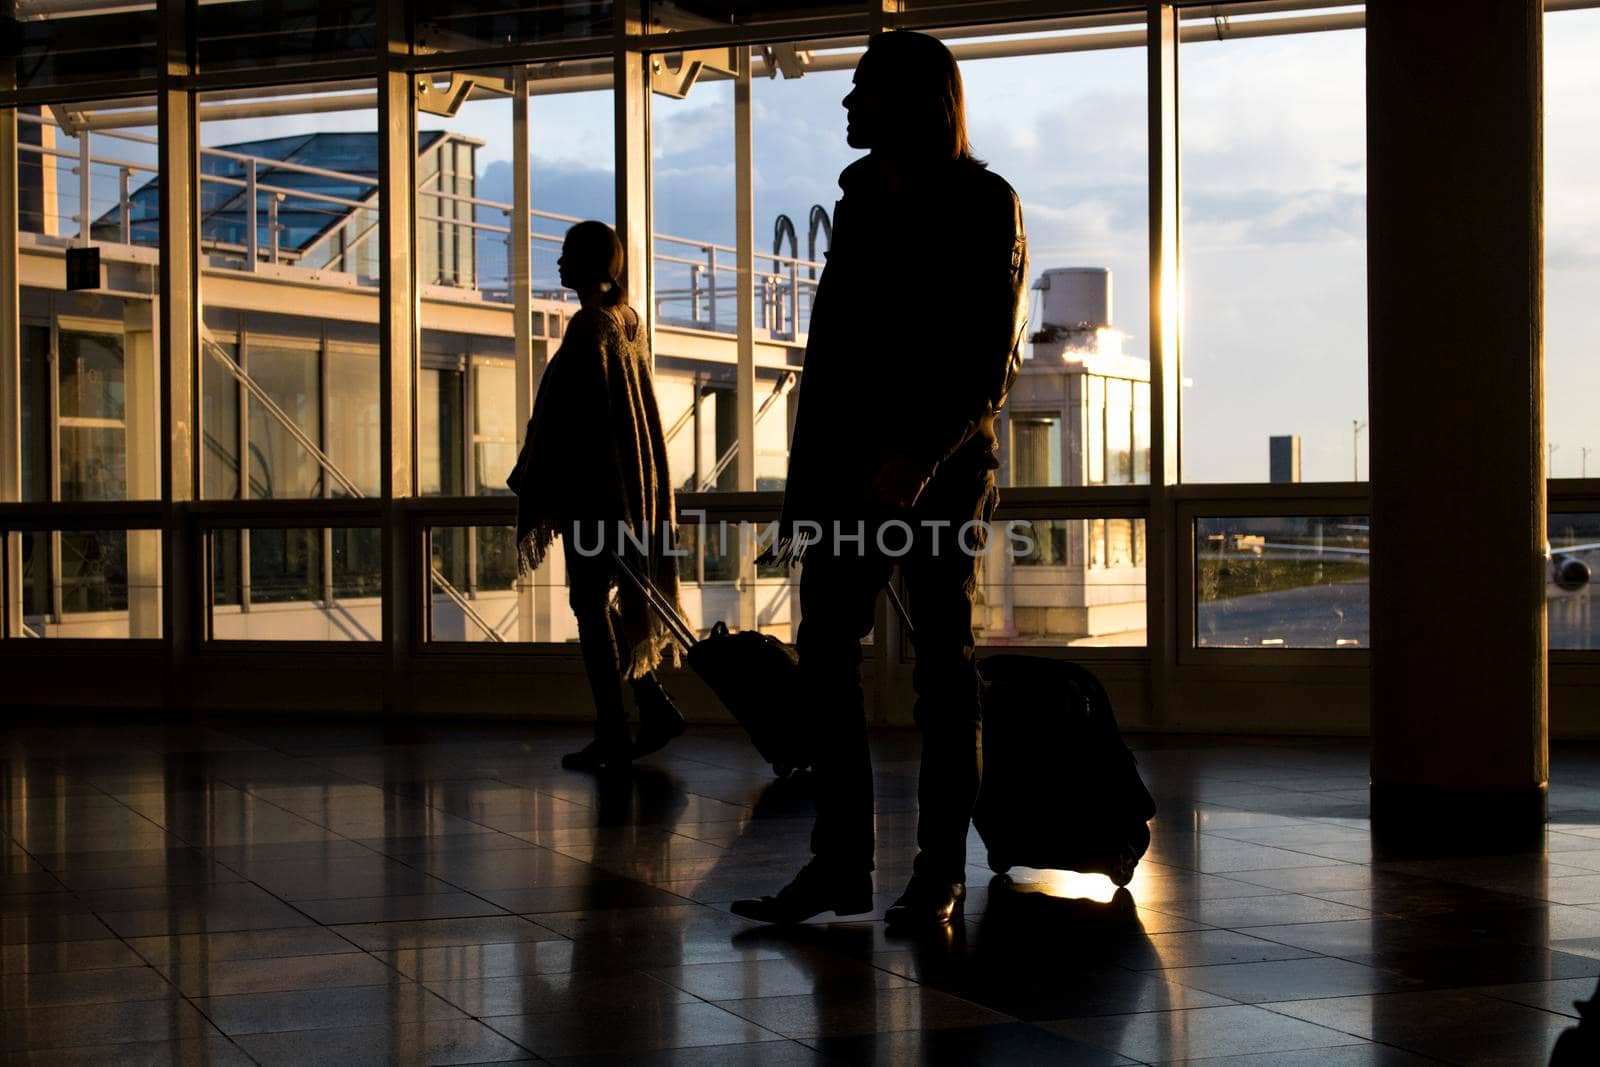 Lost travelers in an airport by ValentimePix